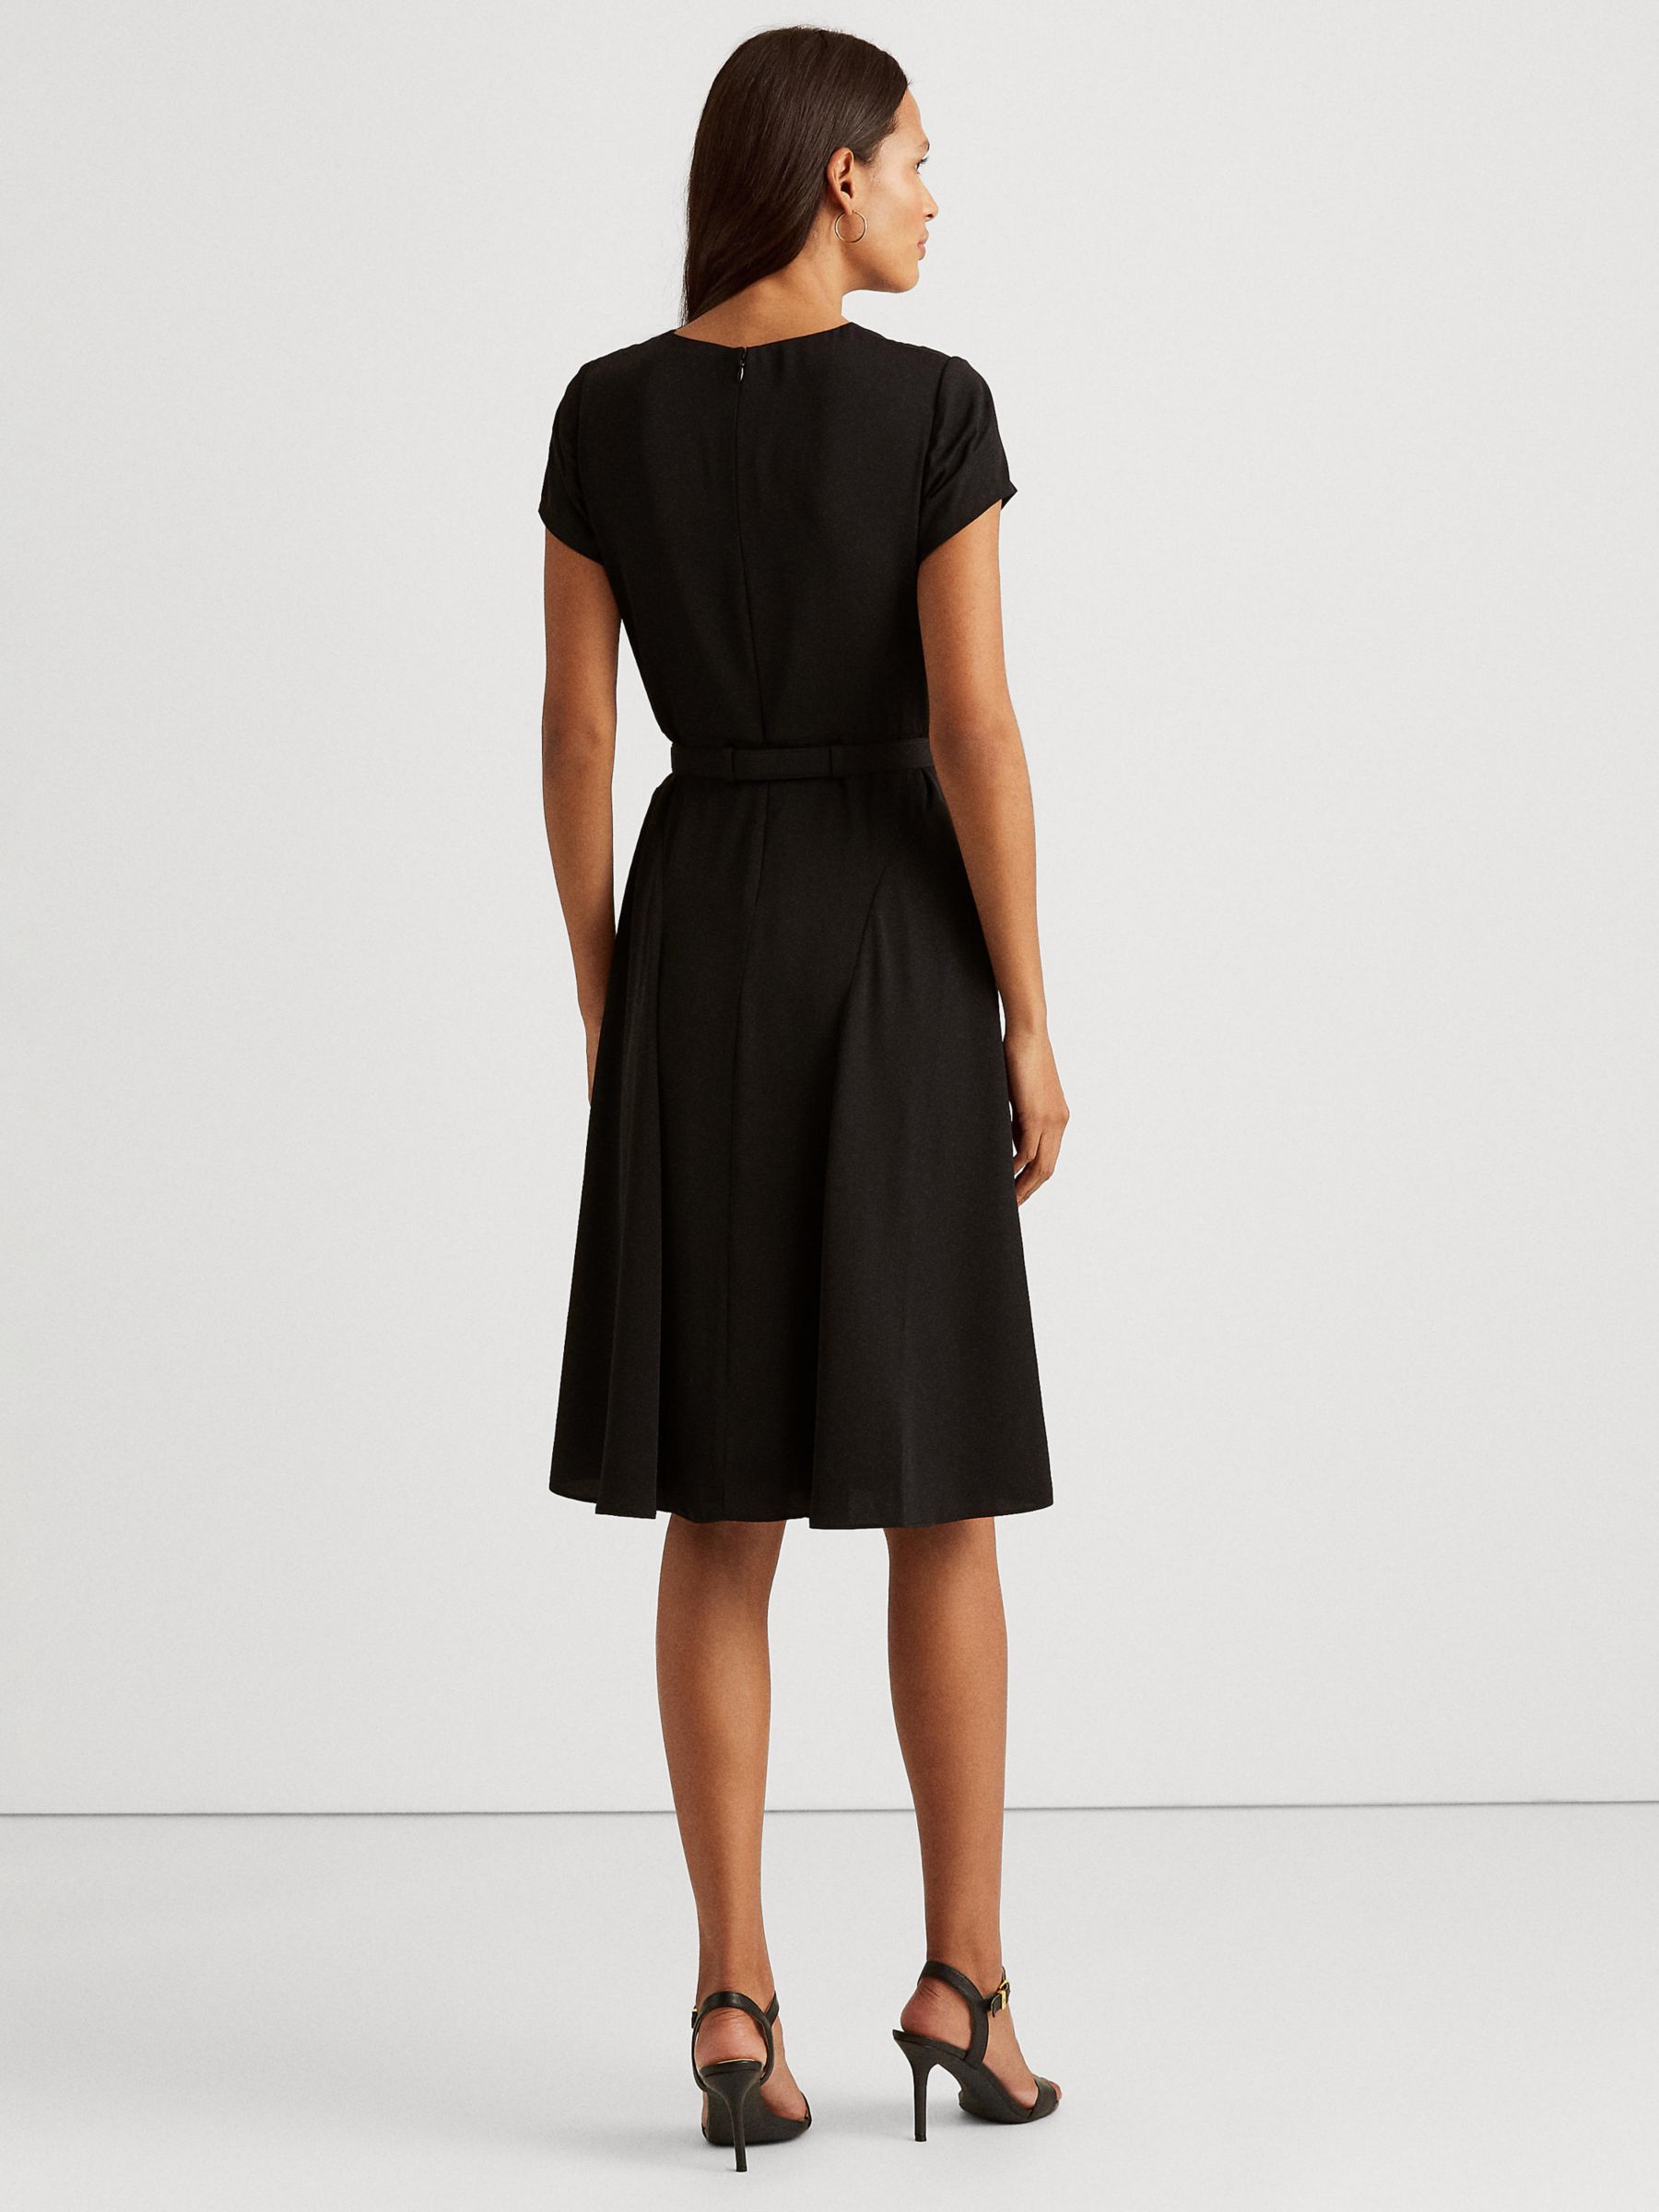 Ralph Lauren Brygitka Fit and Flare Dress, Black at John Lewis & Partners